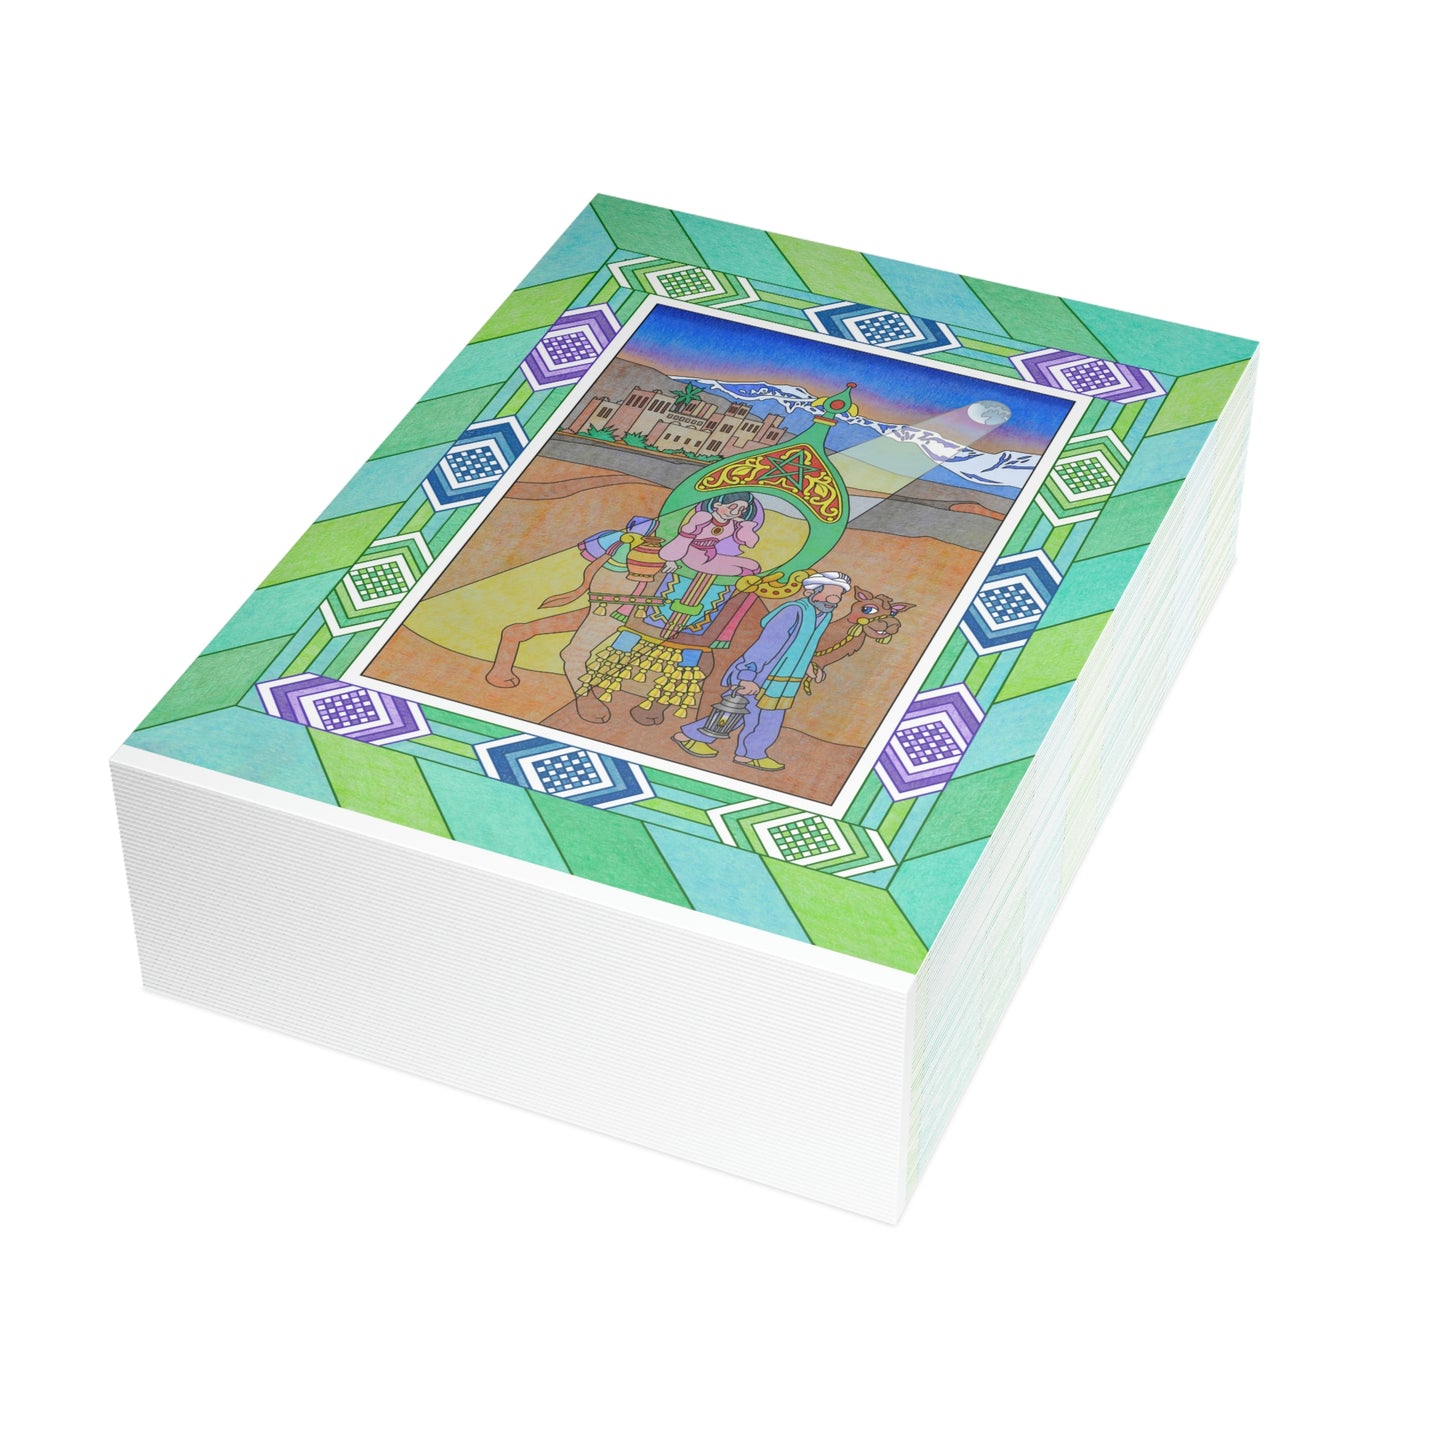 The Stone at the Door! Greeting Card Bundles (envelopes not included)